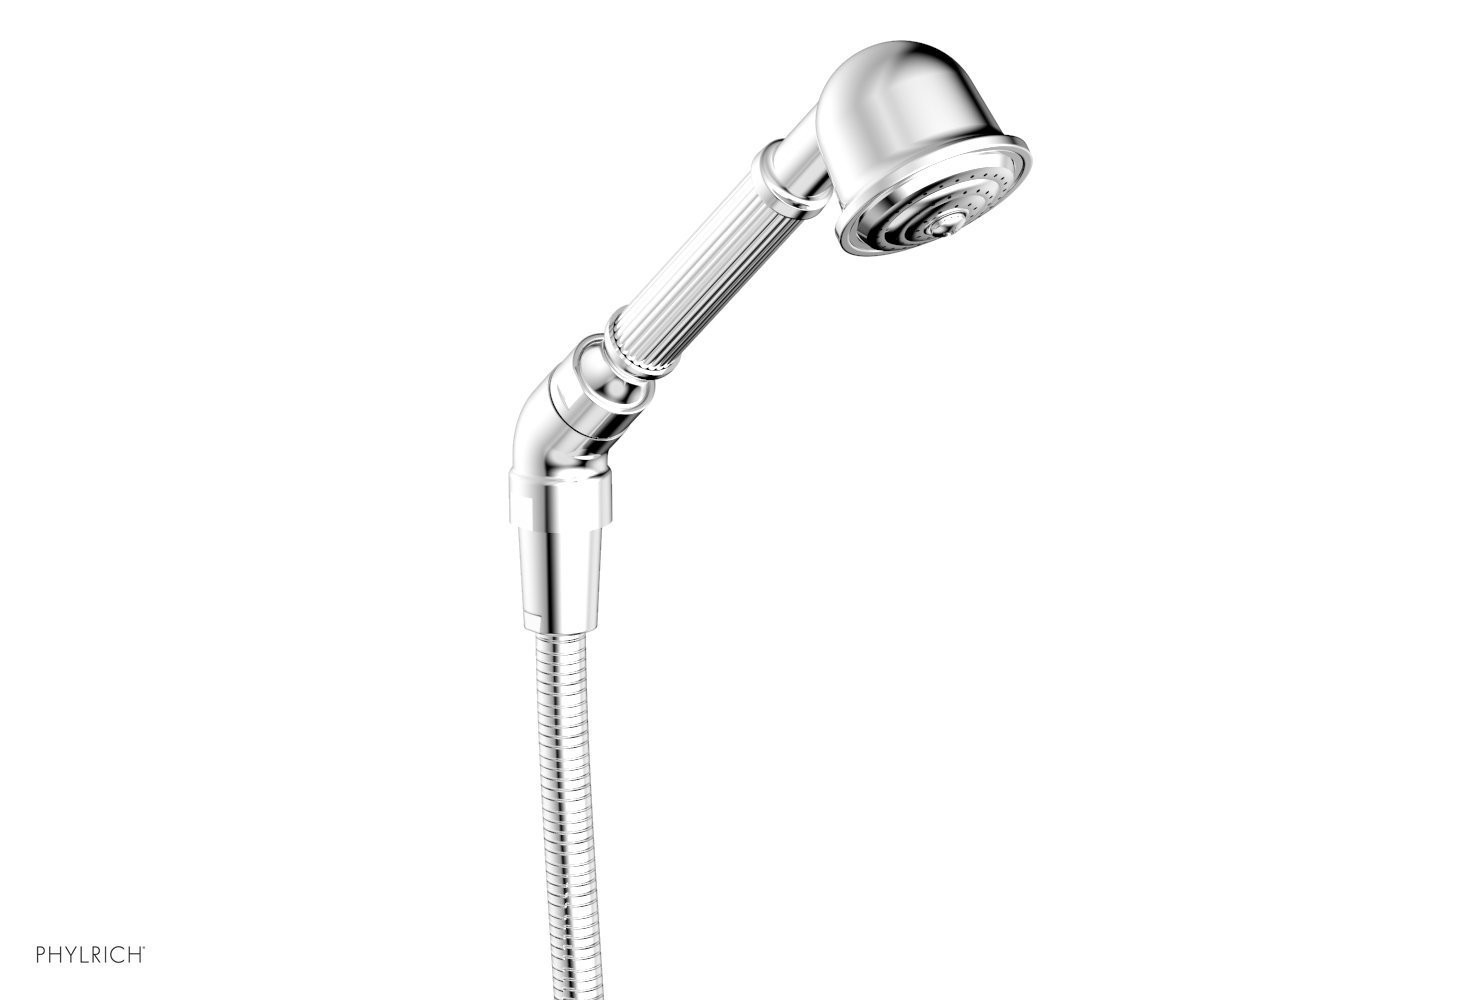 PHYLRICH K6526 GEORGIAN & BARCELONA 6 3/4 INCH SINGLE-FUNCTION HAND SHOWER WITH HOSE